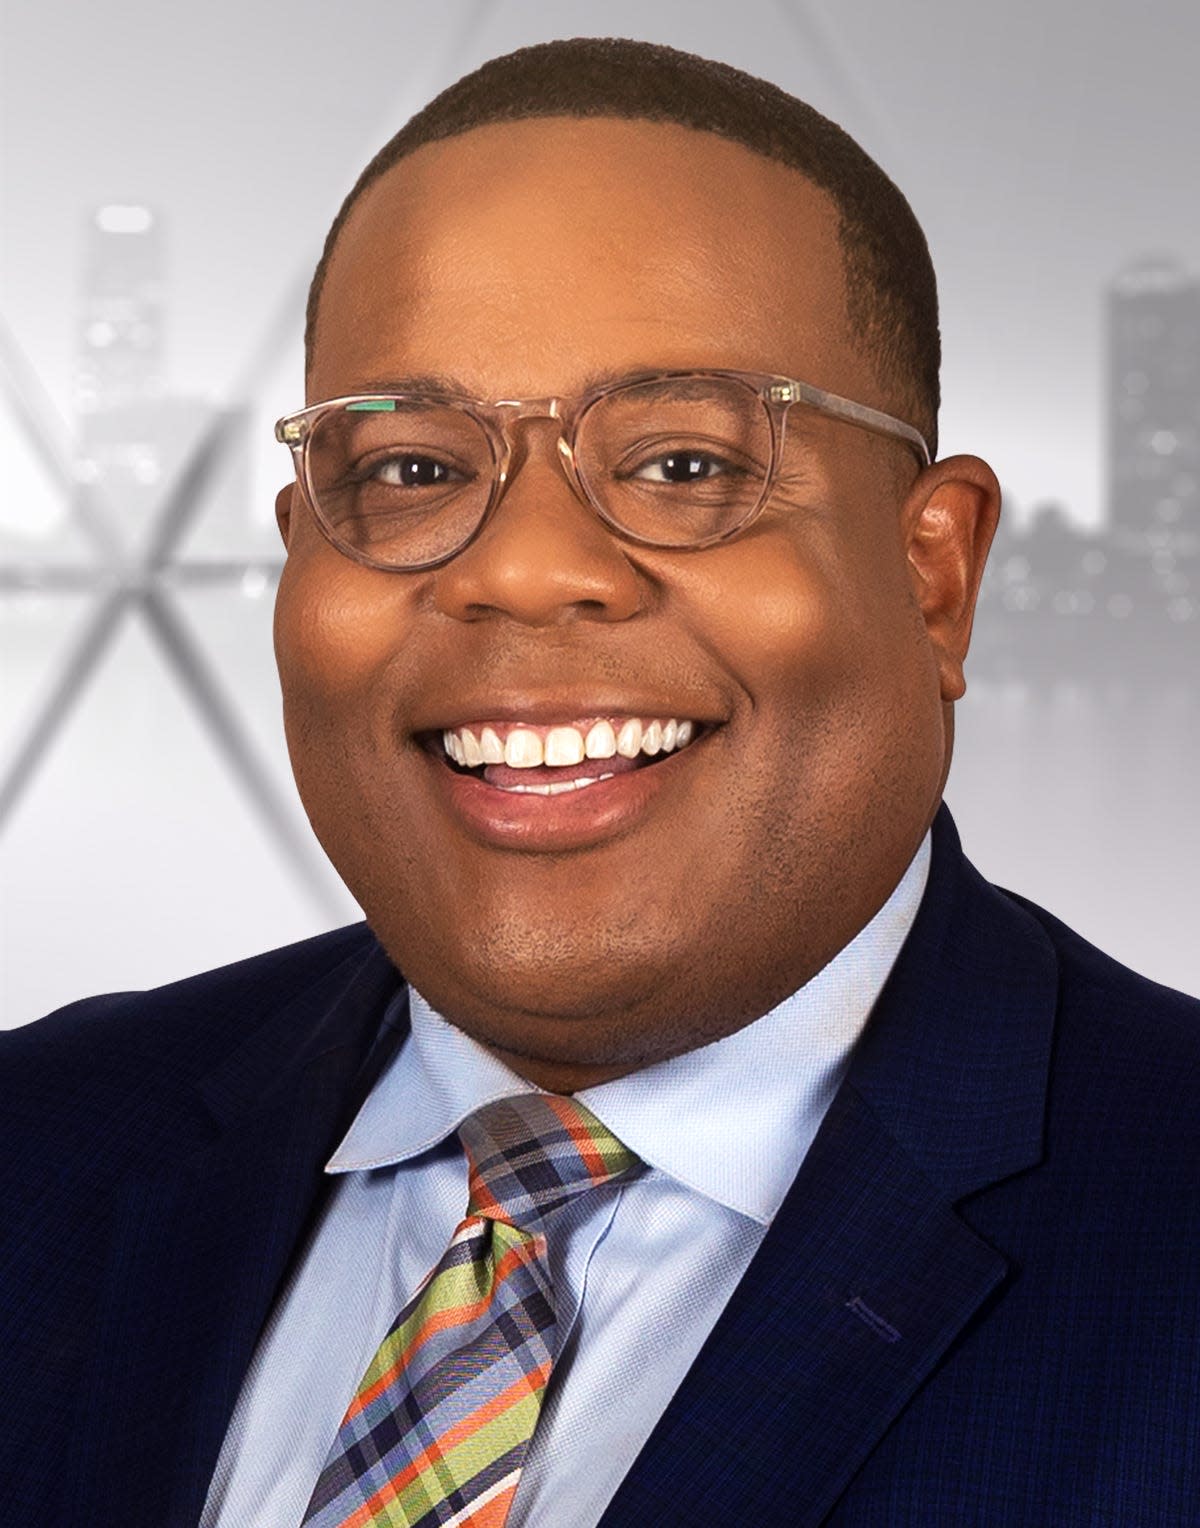 Gerron Jordan has been named anchor of the 11 a.m. morning newscast at WISN-TV (Channel 12).